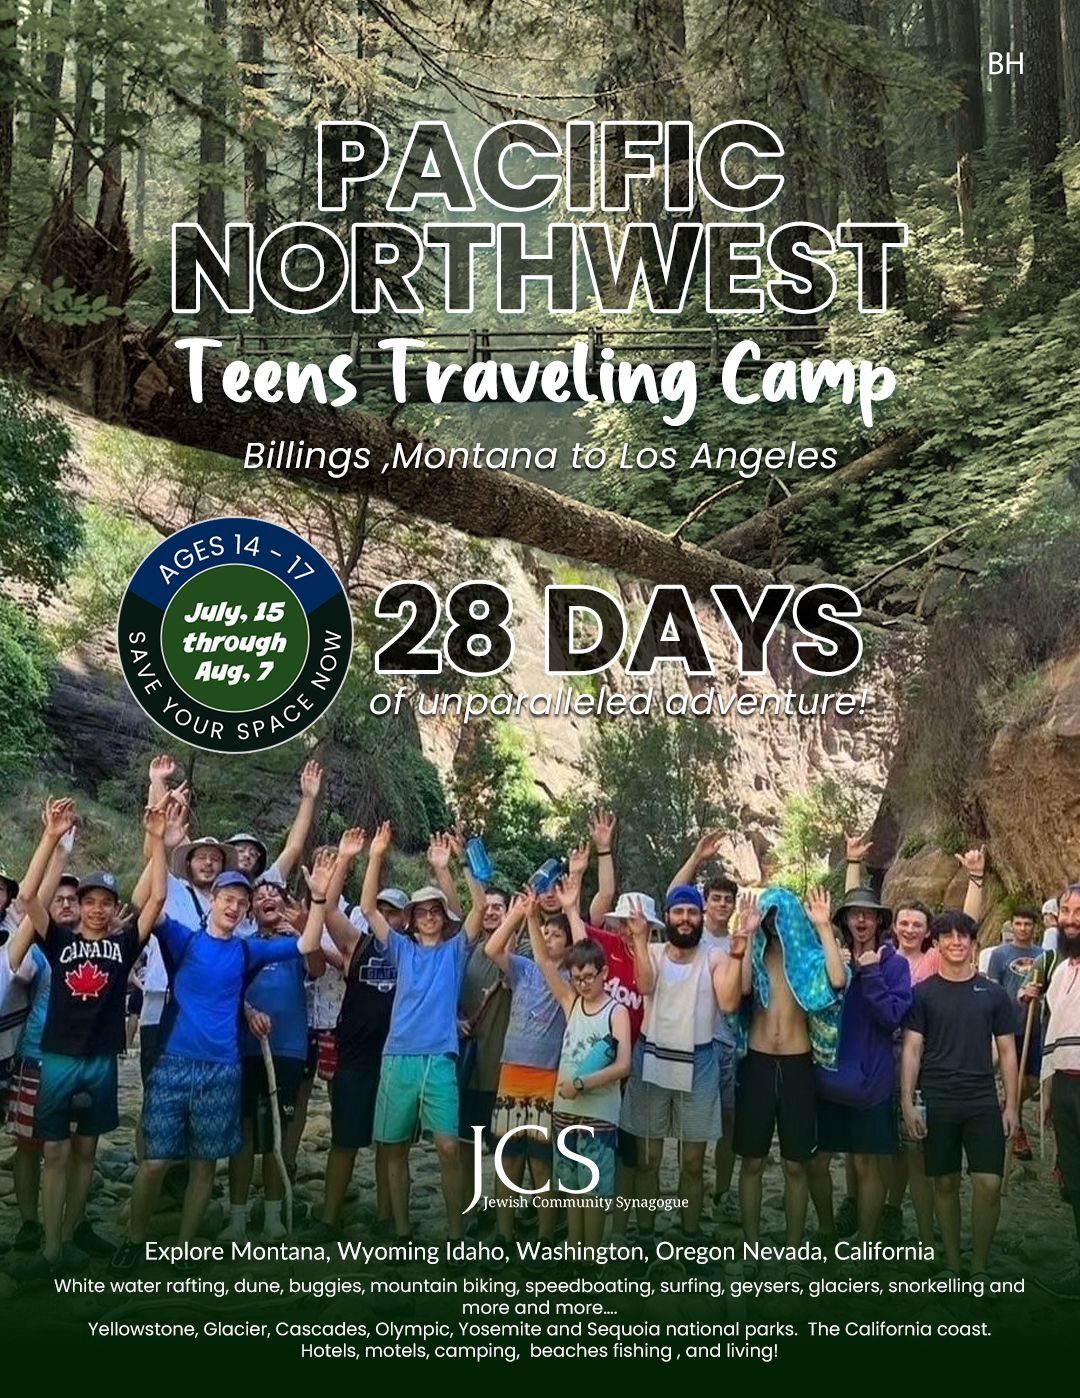 Pacific Northwest Teens Traveling Camp